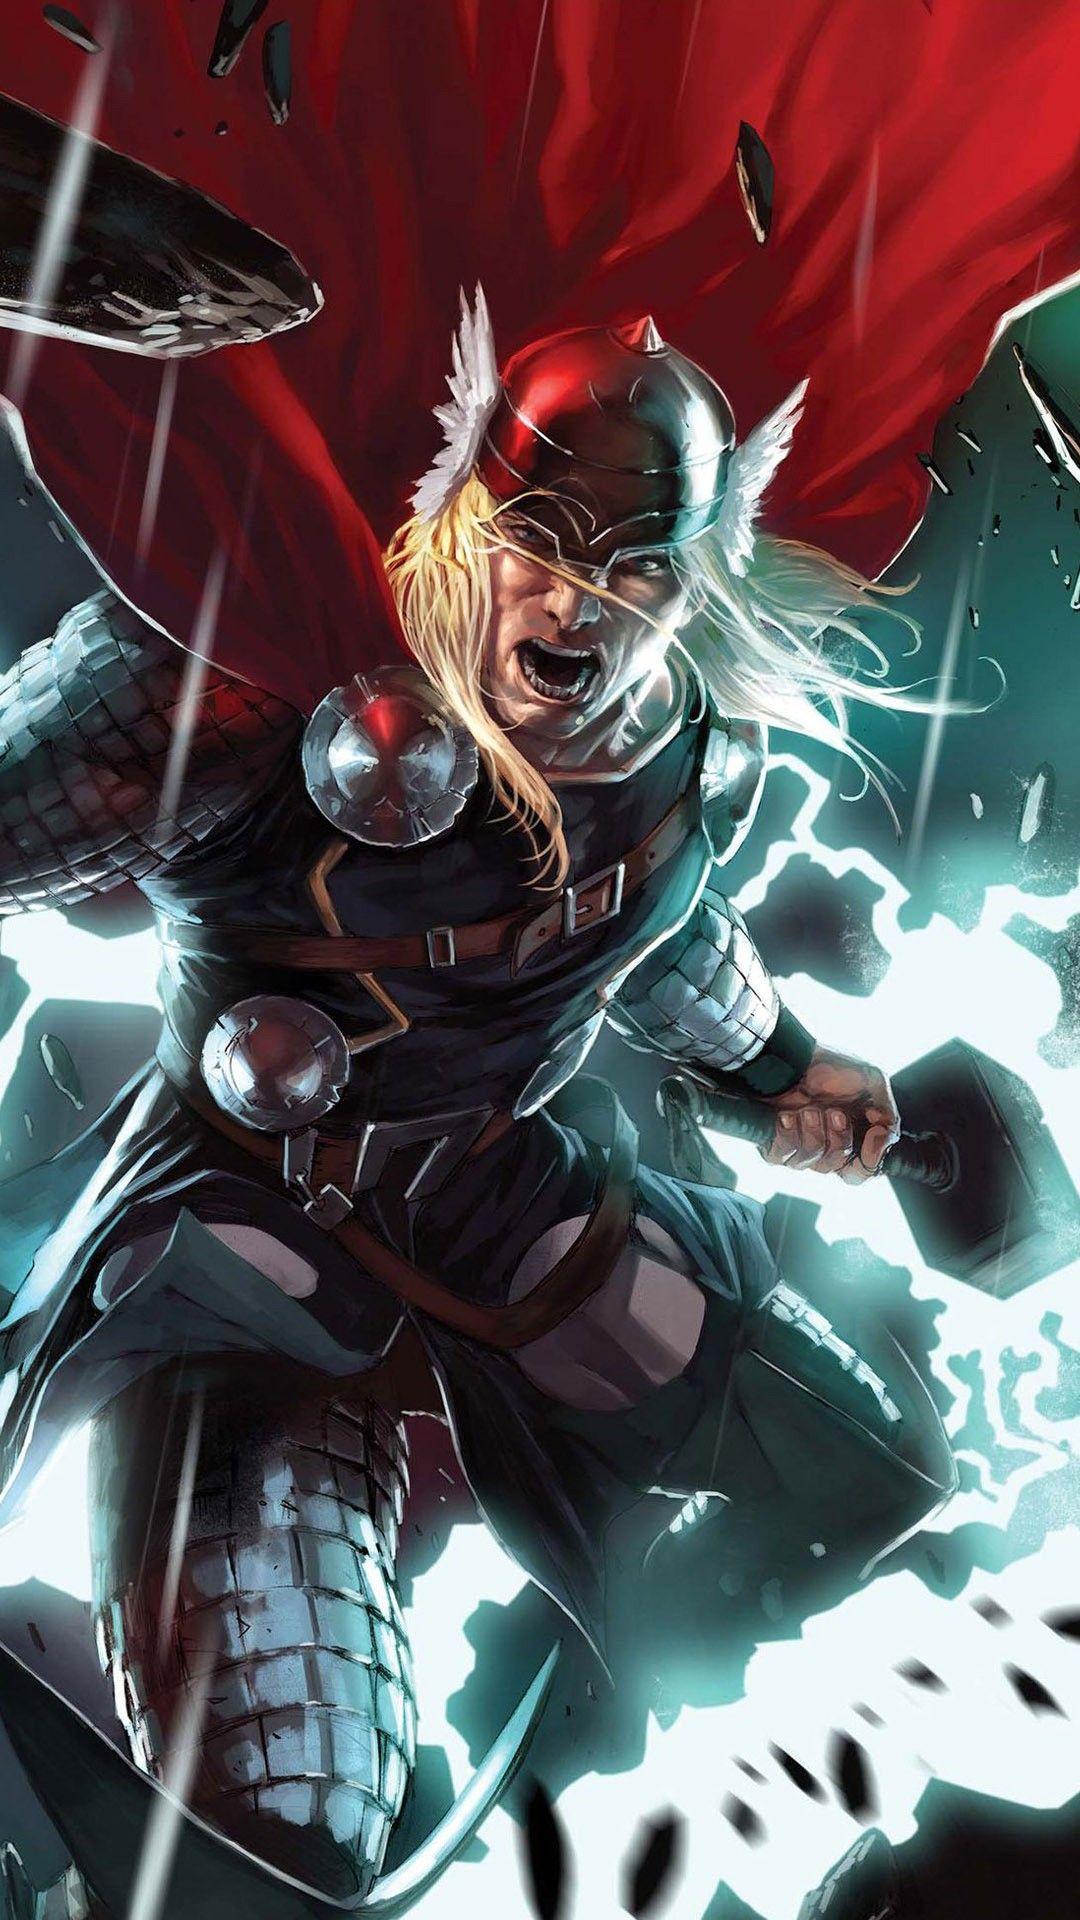  4K  Thor  Wallpapers  Top Free 4K  Thor  Backgrounds  